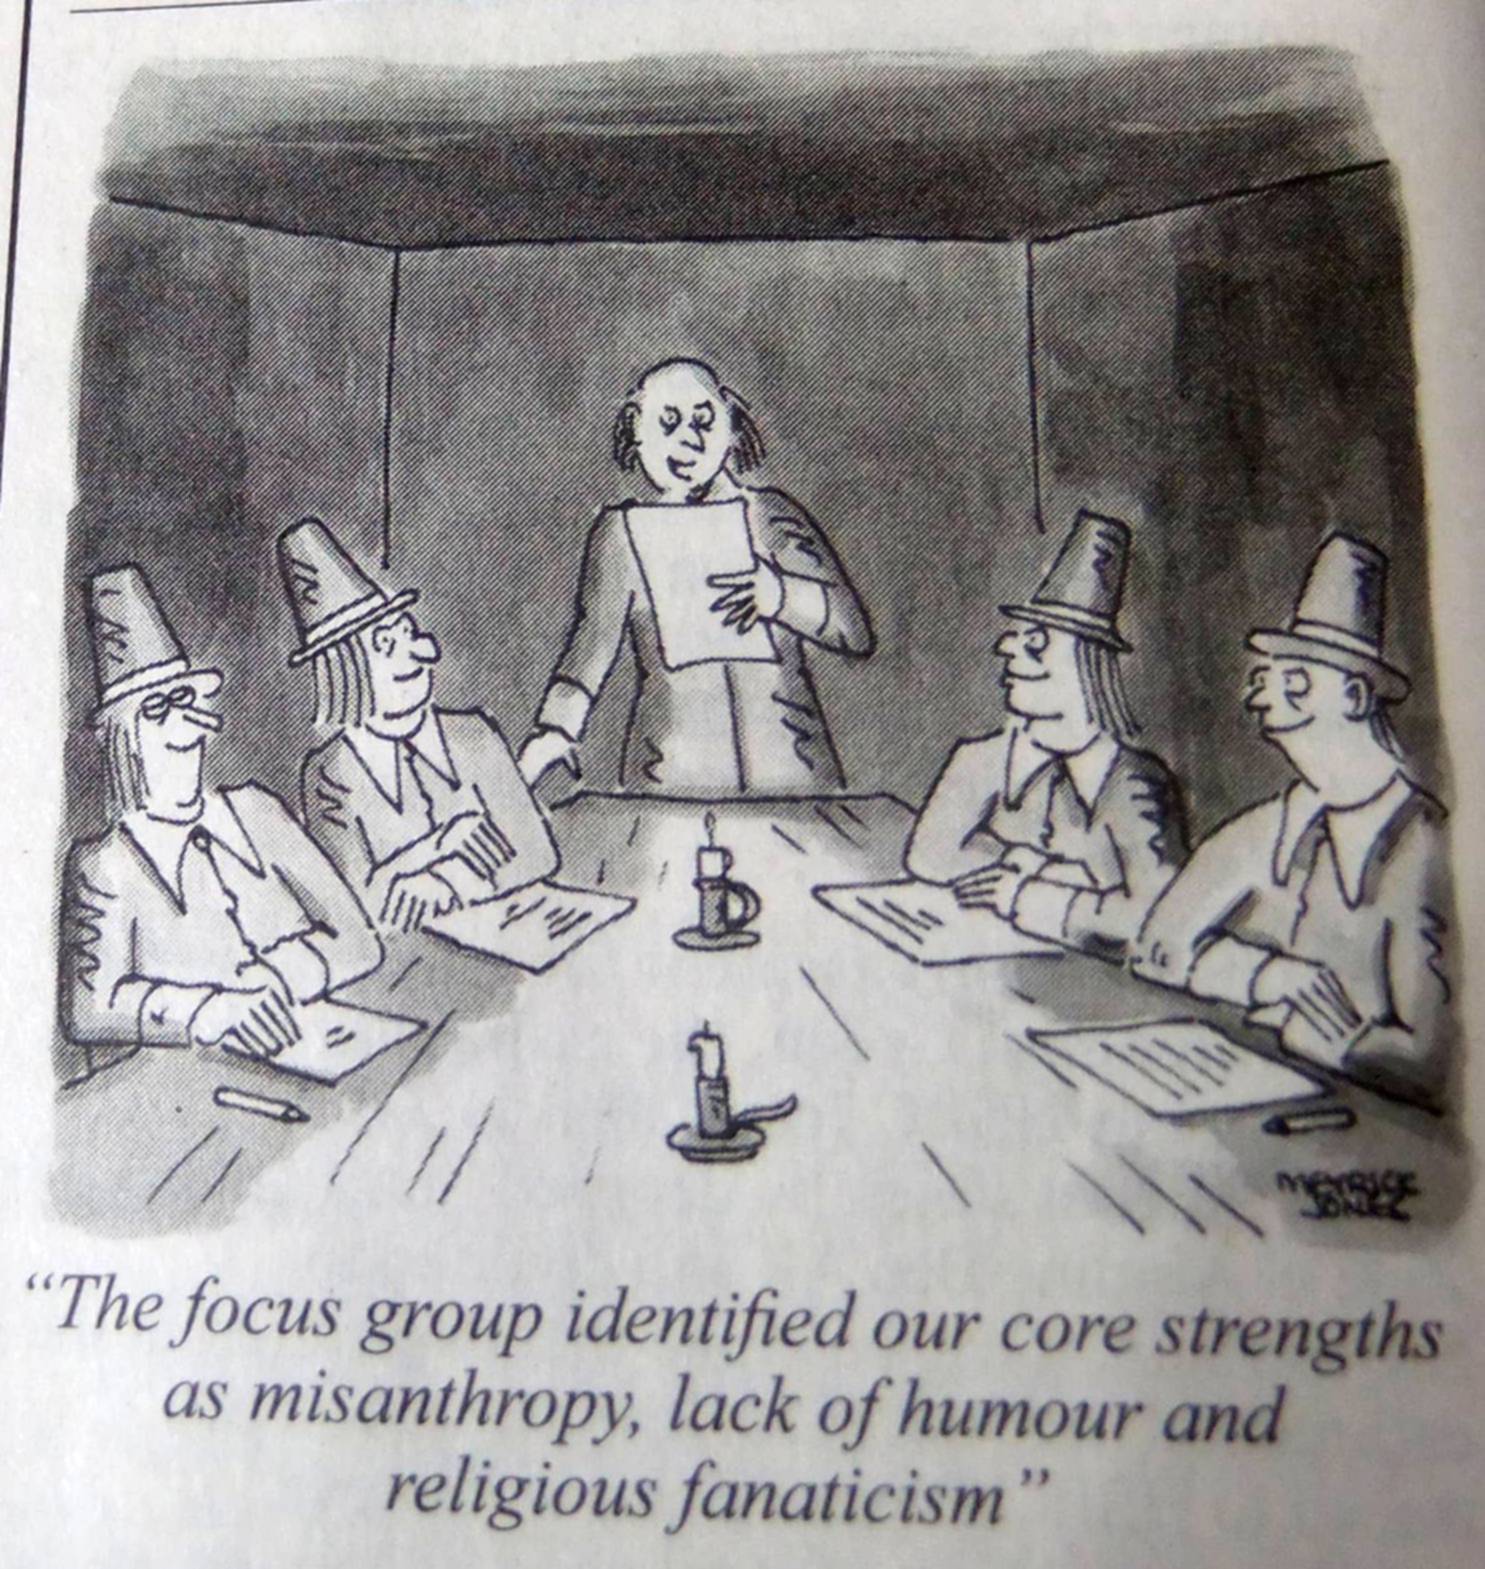 a book opened to a cartoon of a group sitting around a table